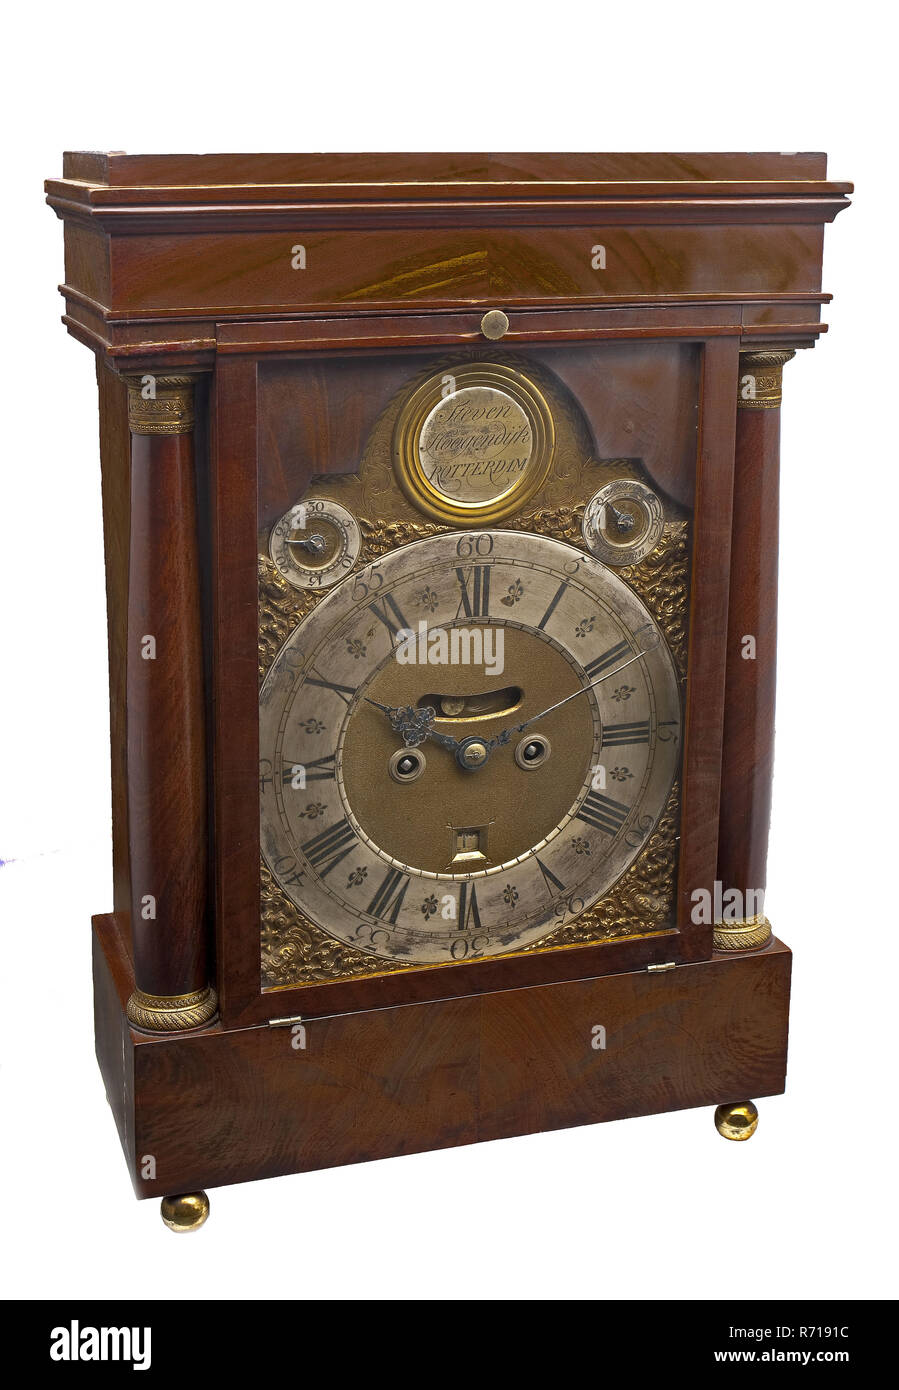 import: Steven Hoogendijk, Compound table clock with brown wooden case and two pillars, clock clock timepiece measuring instrument wood oak mahogany brass steel, Movement: platine movement with going work with railing with the pendulum to sling-bear 'up-and-down-regulation' and pendulum clicker in the dial. During transport, the pendulum can be secured in blocking clamp on the back plate. Saw beat on single bell with rehearsal possibility. Both gears have snek. The back plate is engraved with acanthus motifs in single frame. The lever of the regulation is engraved in herringbone pattern the bl Stock Photo